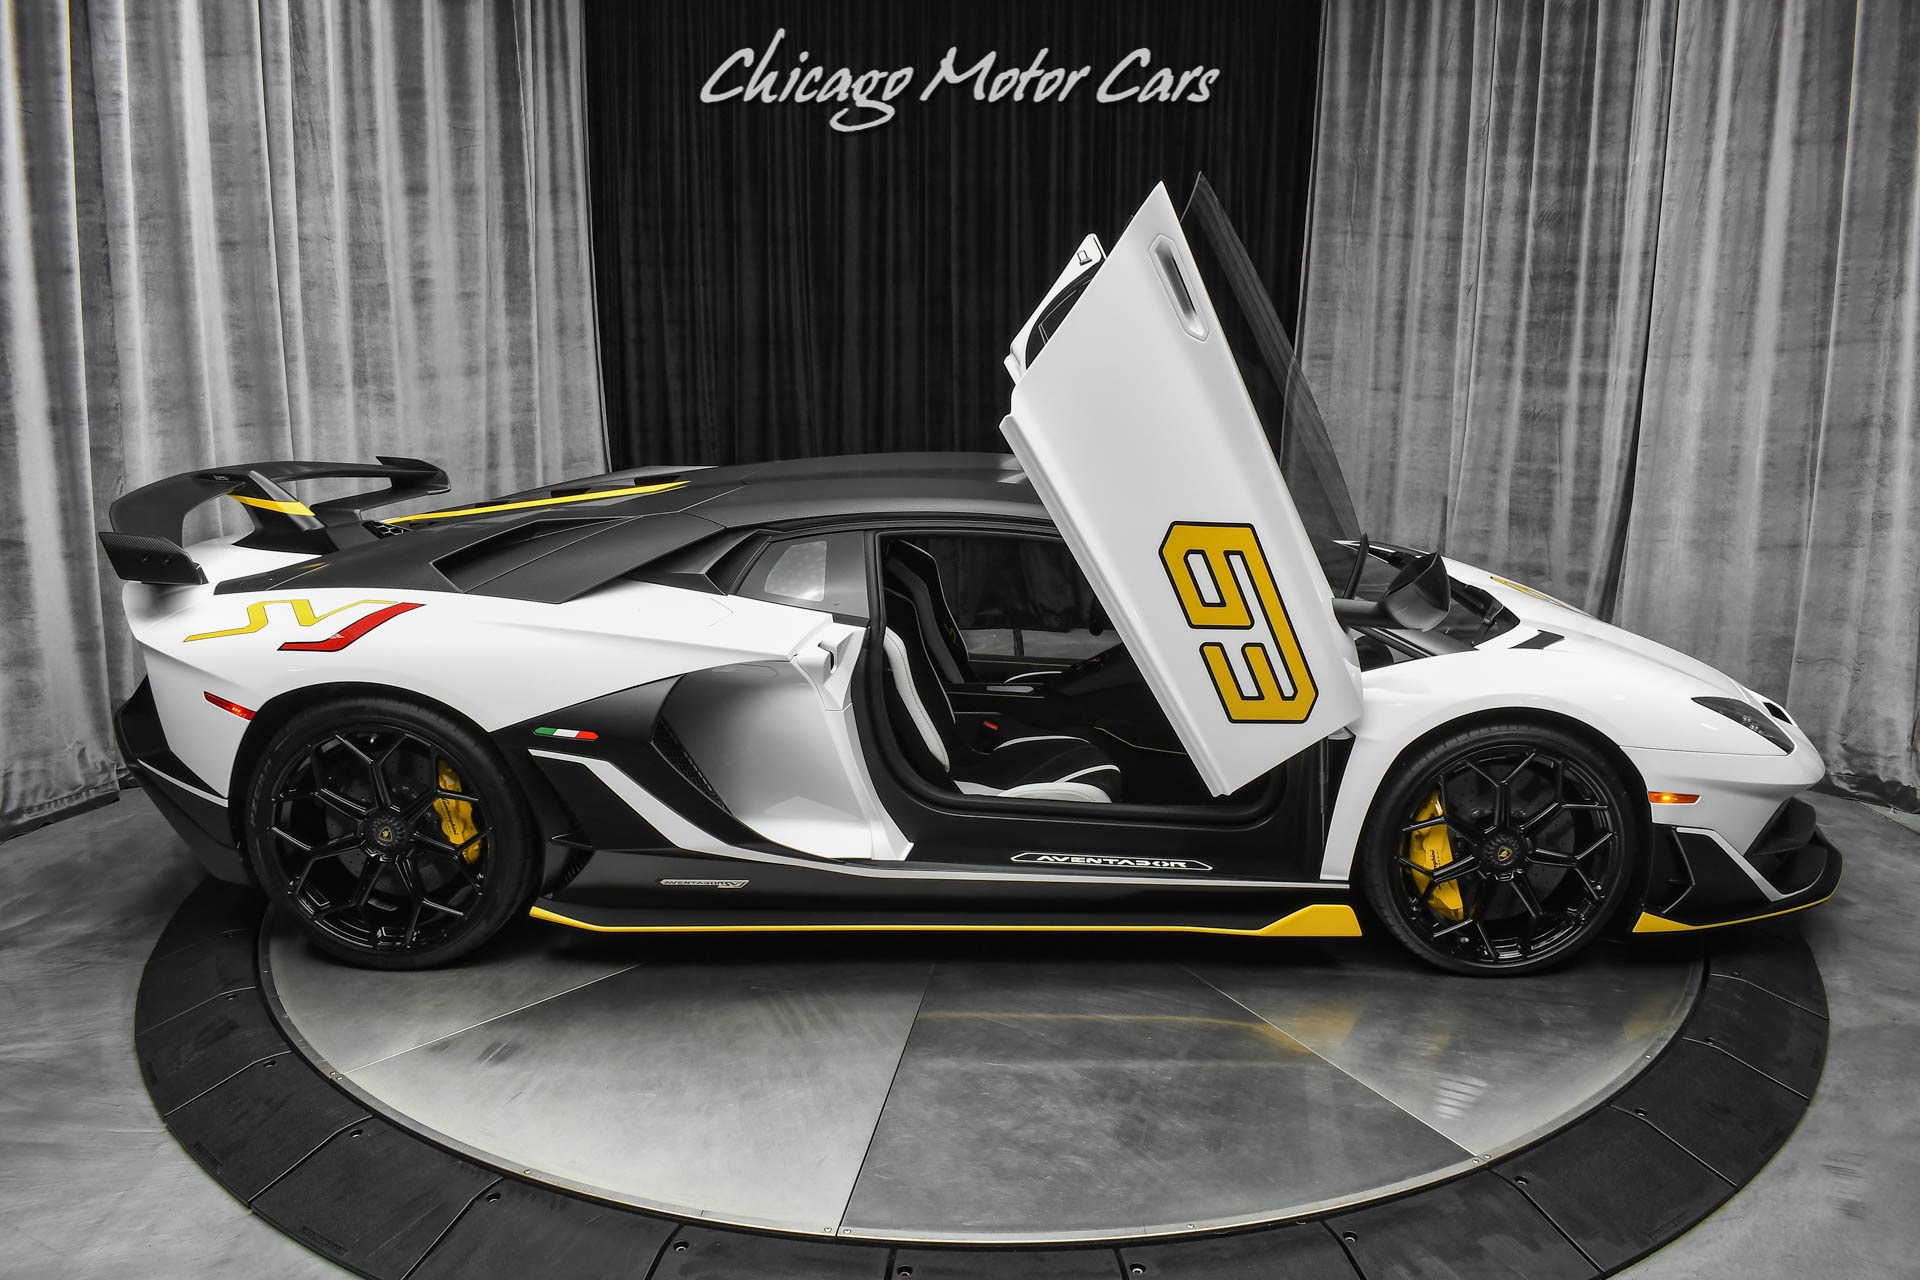 Used 2020 Lamborghini Aventador LP770-4 SVJ 63 Coupe 1/63 Produced!  Extremely Rare! HOT Spec TONS of Carbon For Sale ($999,800) | Chicago Motor  Cars Stock #19171